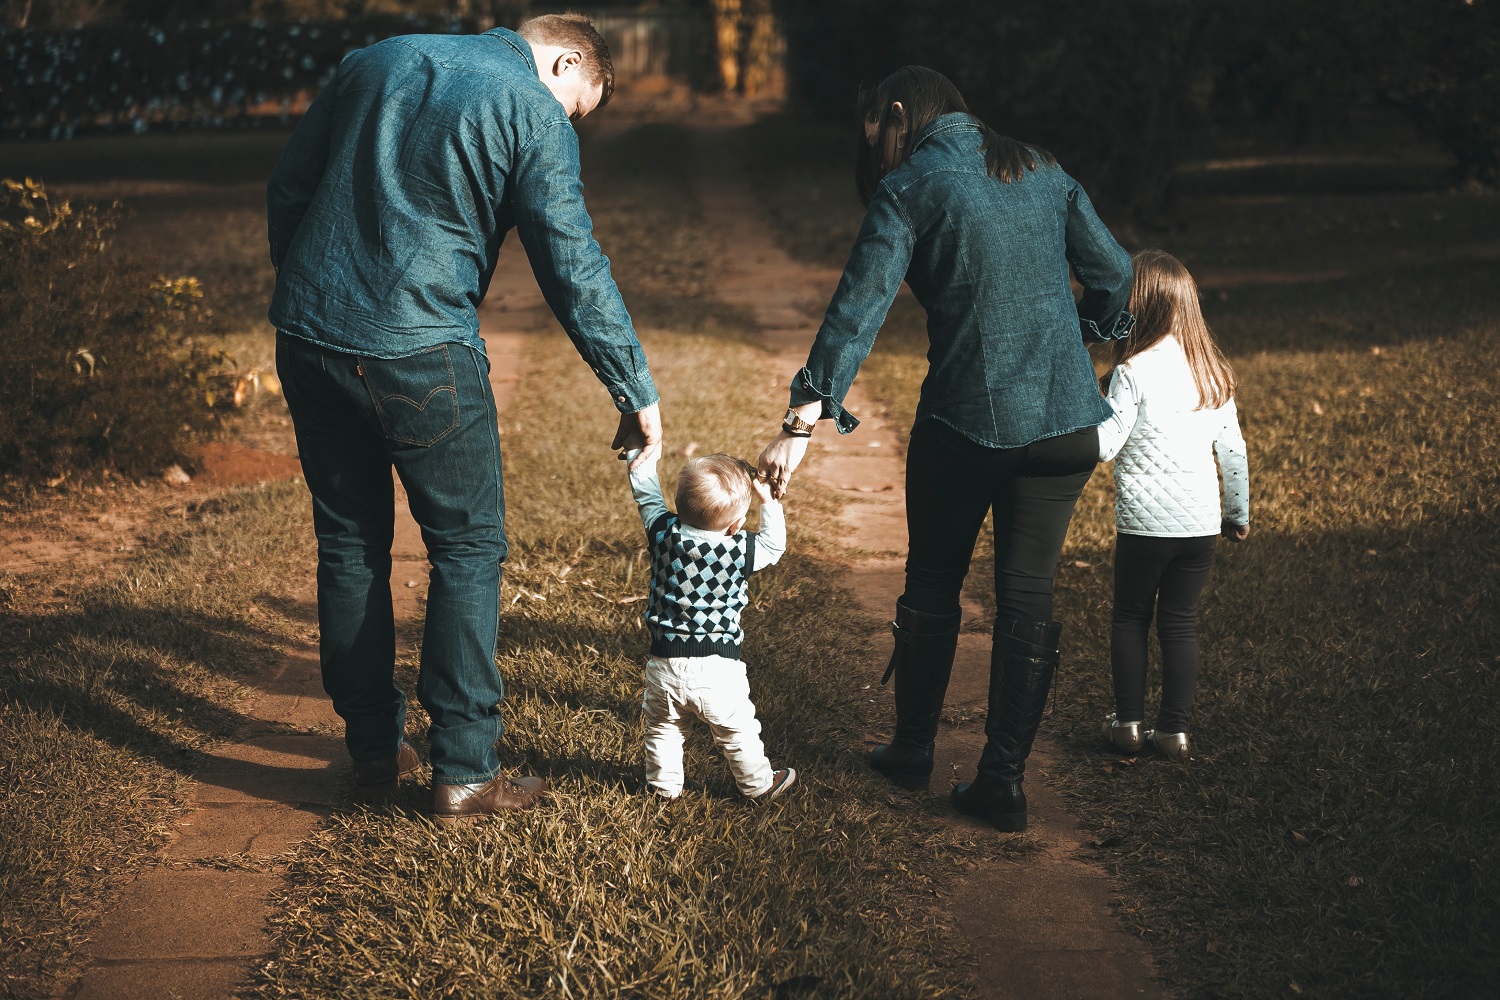 Two parents with two children all holding hands on a walk outside